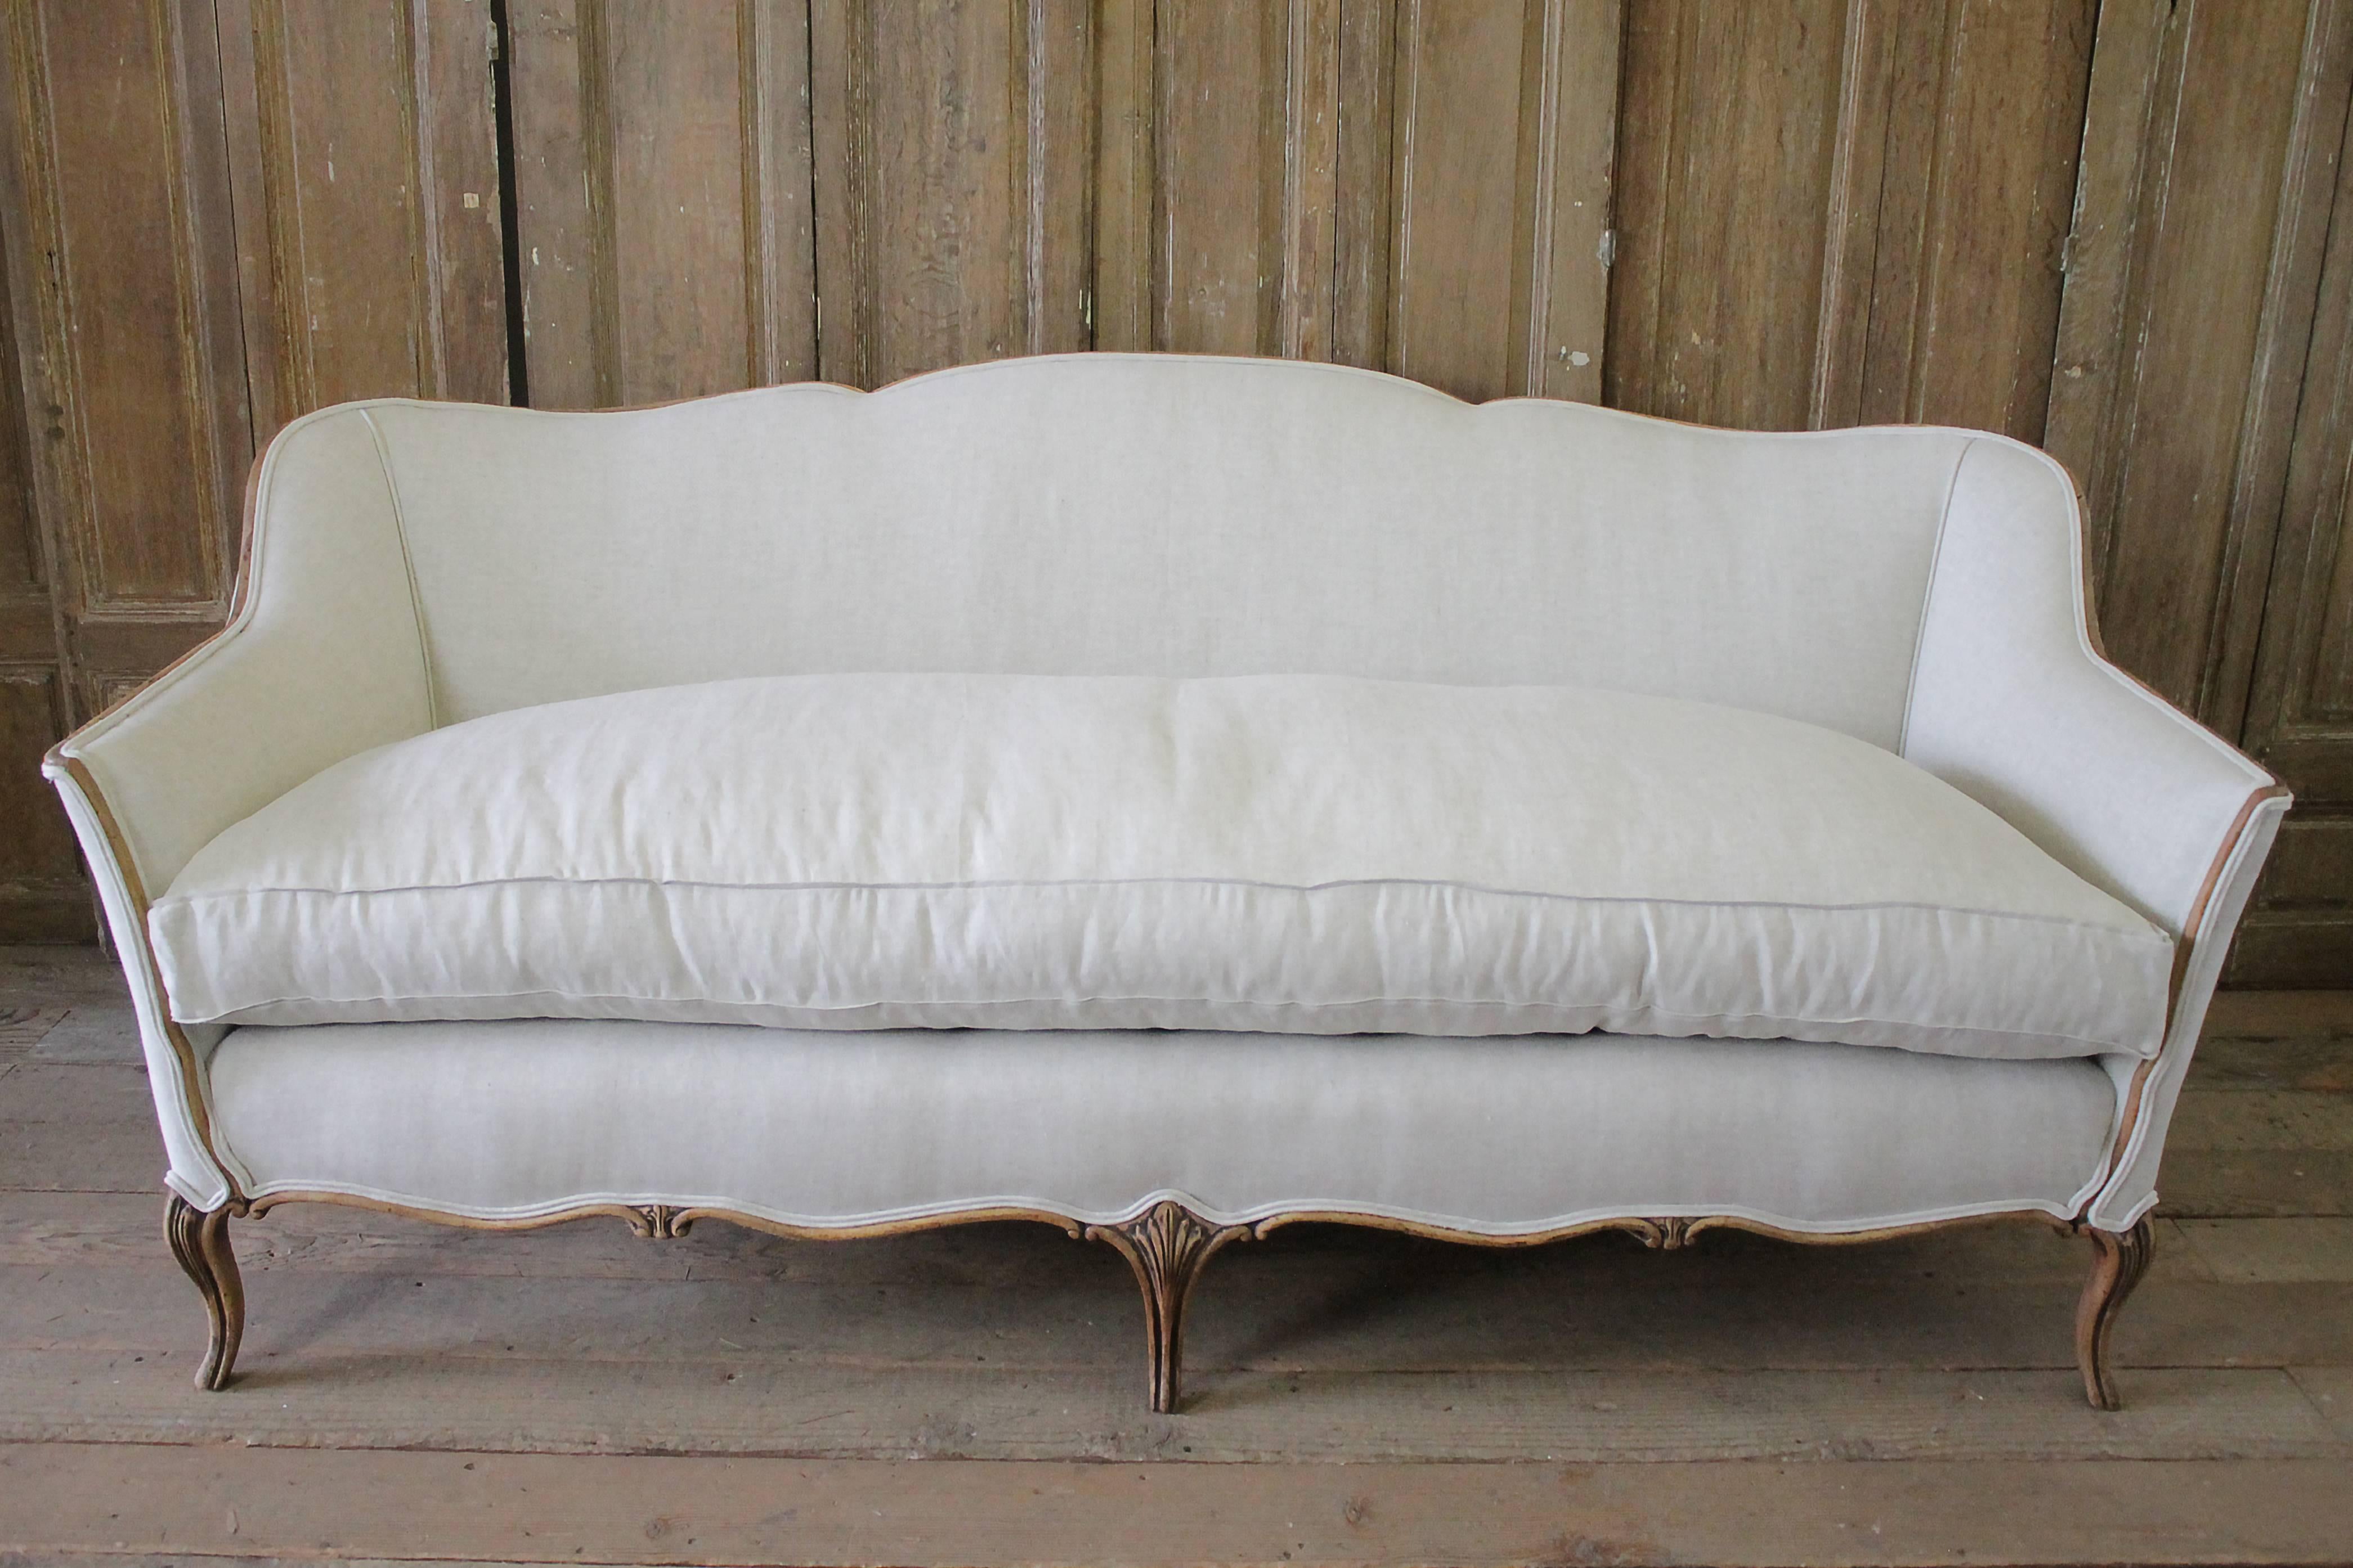 Early 20th century French country style Belgian linen upholstered sofa.
The wood frame has a wonderful stripped weathered look, great patina, medium colored walnut. Mustache back shape, we reupholstered this sofa in an oatmeal colored Belgian